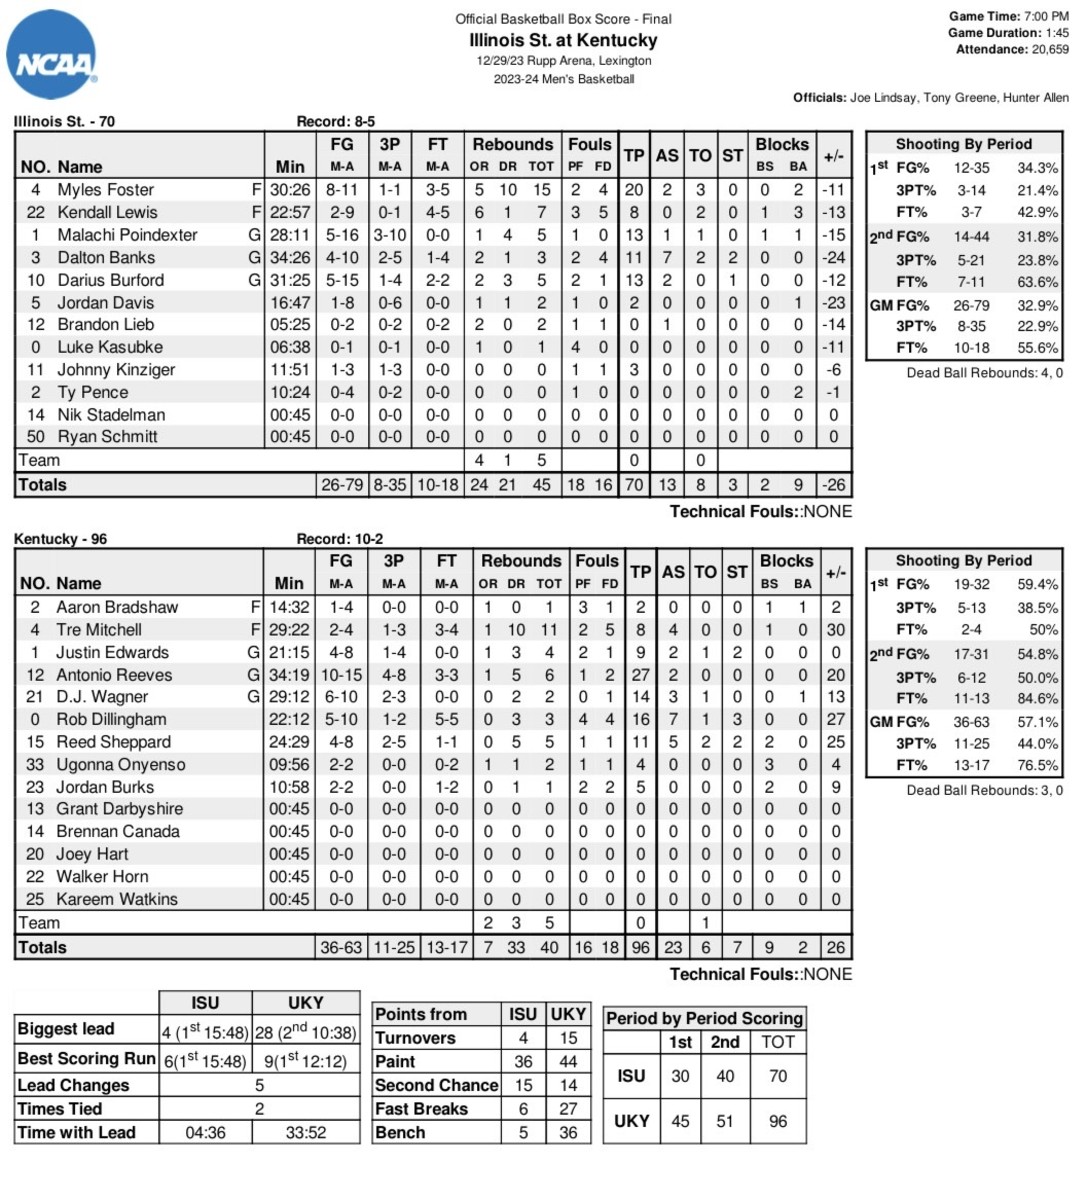 Box score from Kentucky's 96-70 win over Illinois State